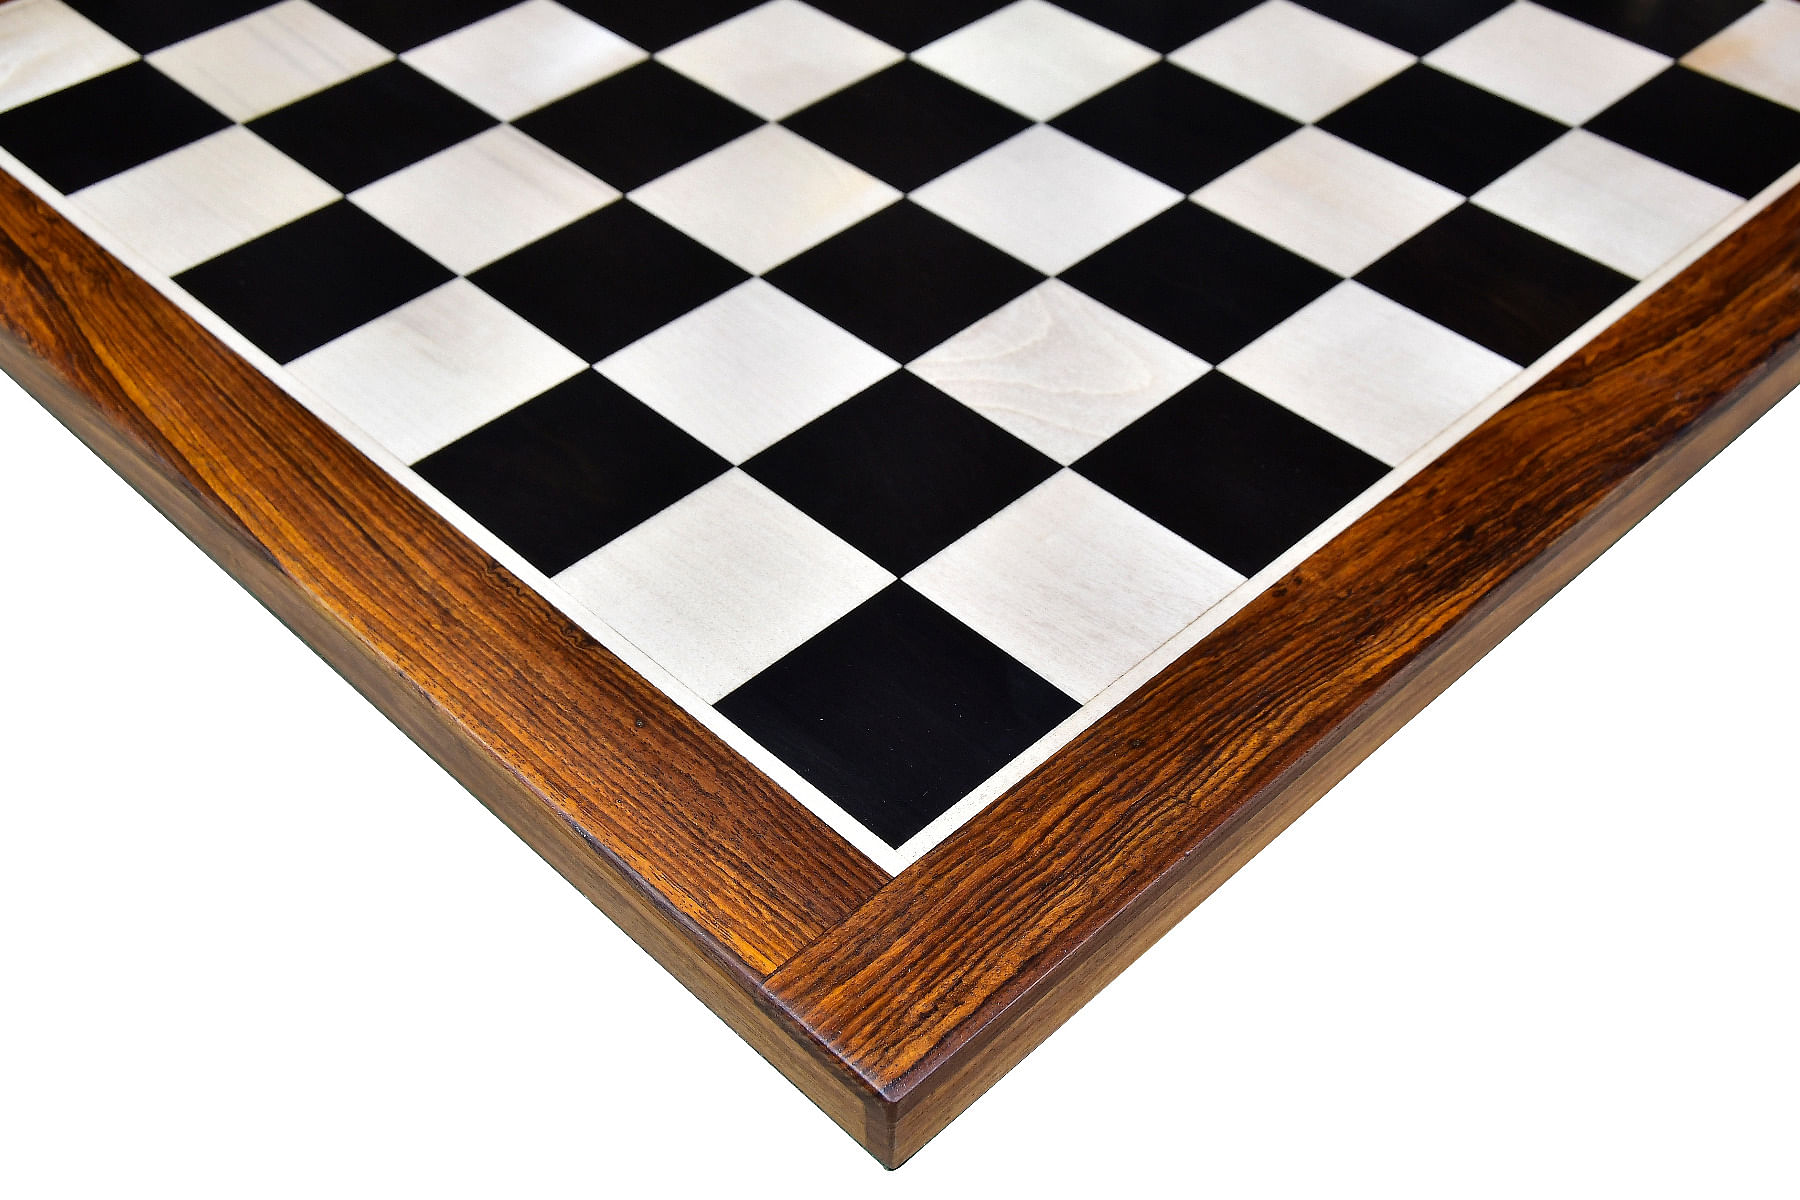 Solid Wooden Indian Chess Board in Genuine Ebony Wood & Maple Wood with Sheesham Wood Border 21